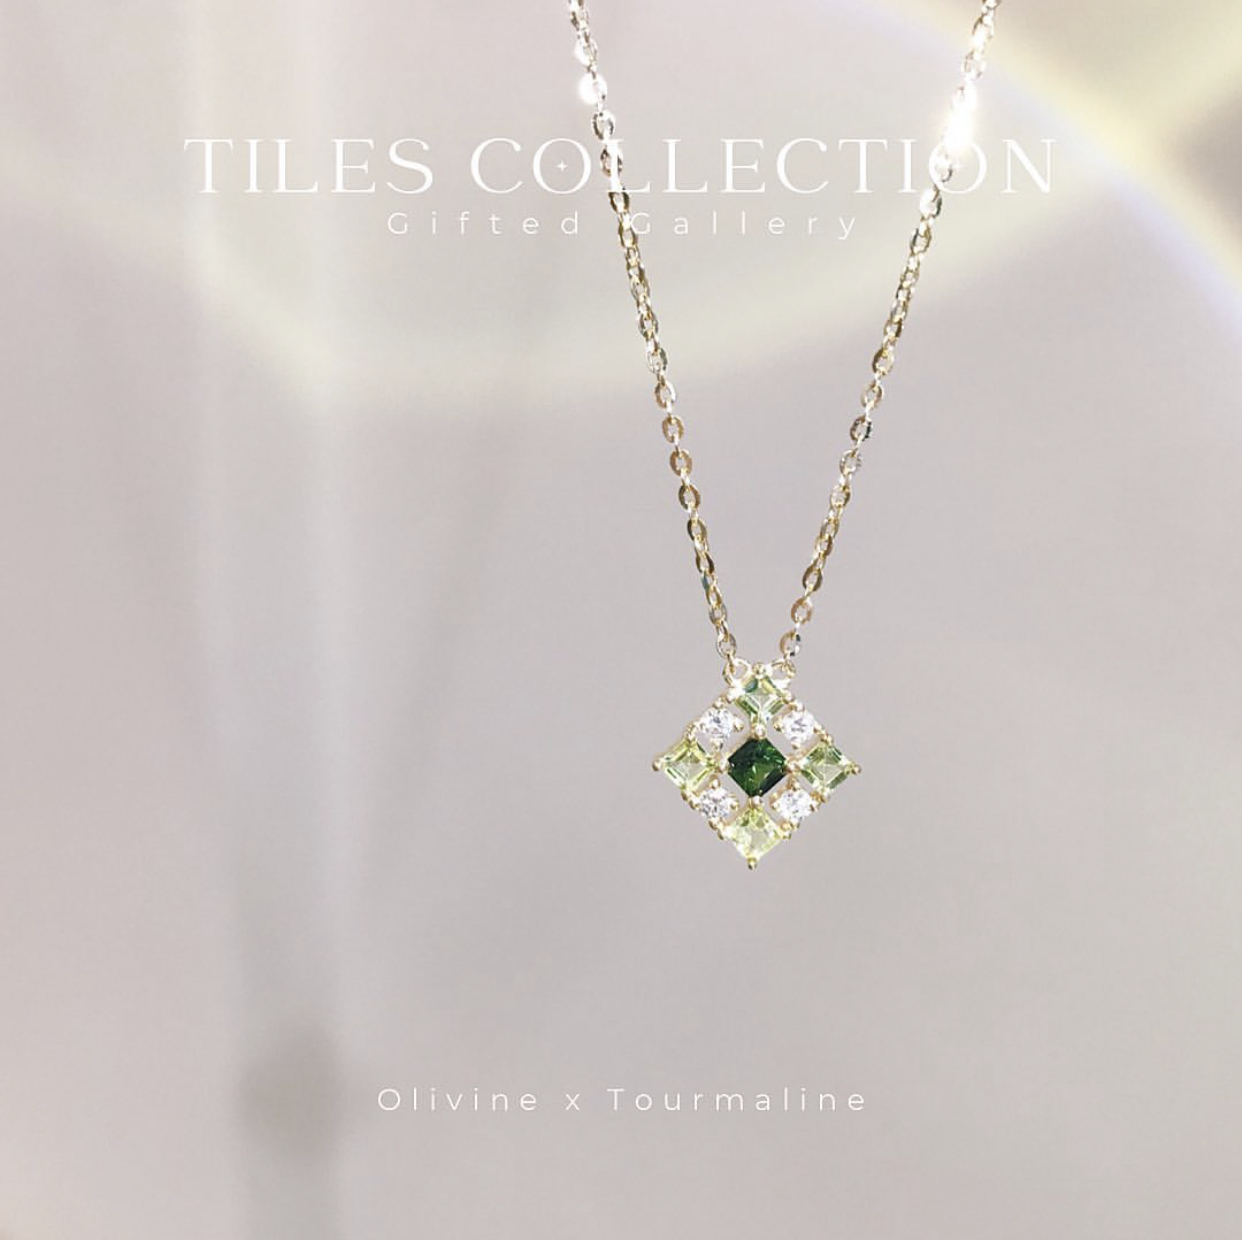 Tiles Collection in Olivine and Tourmaline by Gifted Gallery